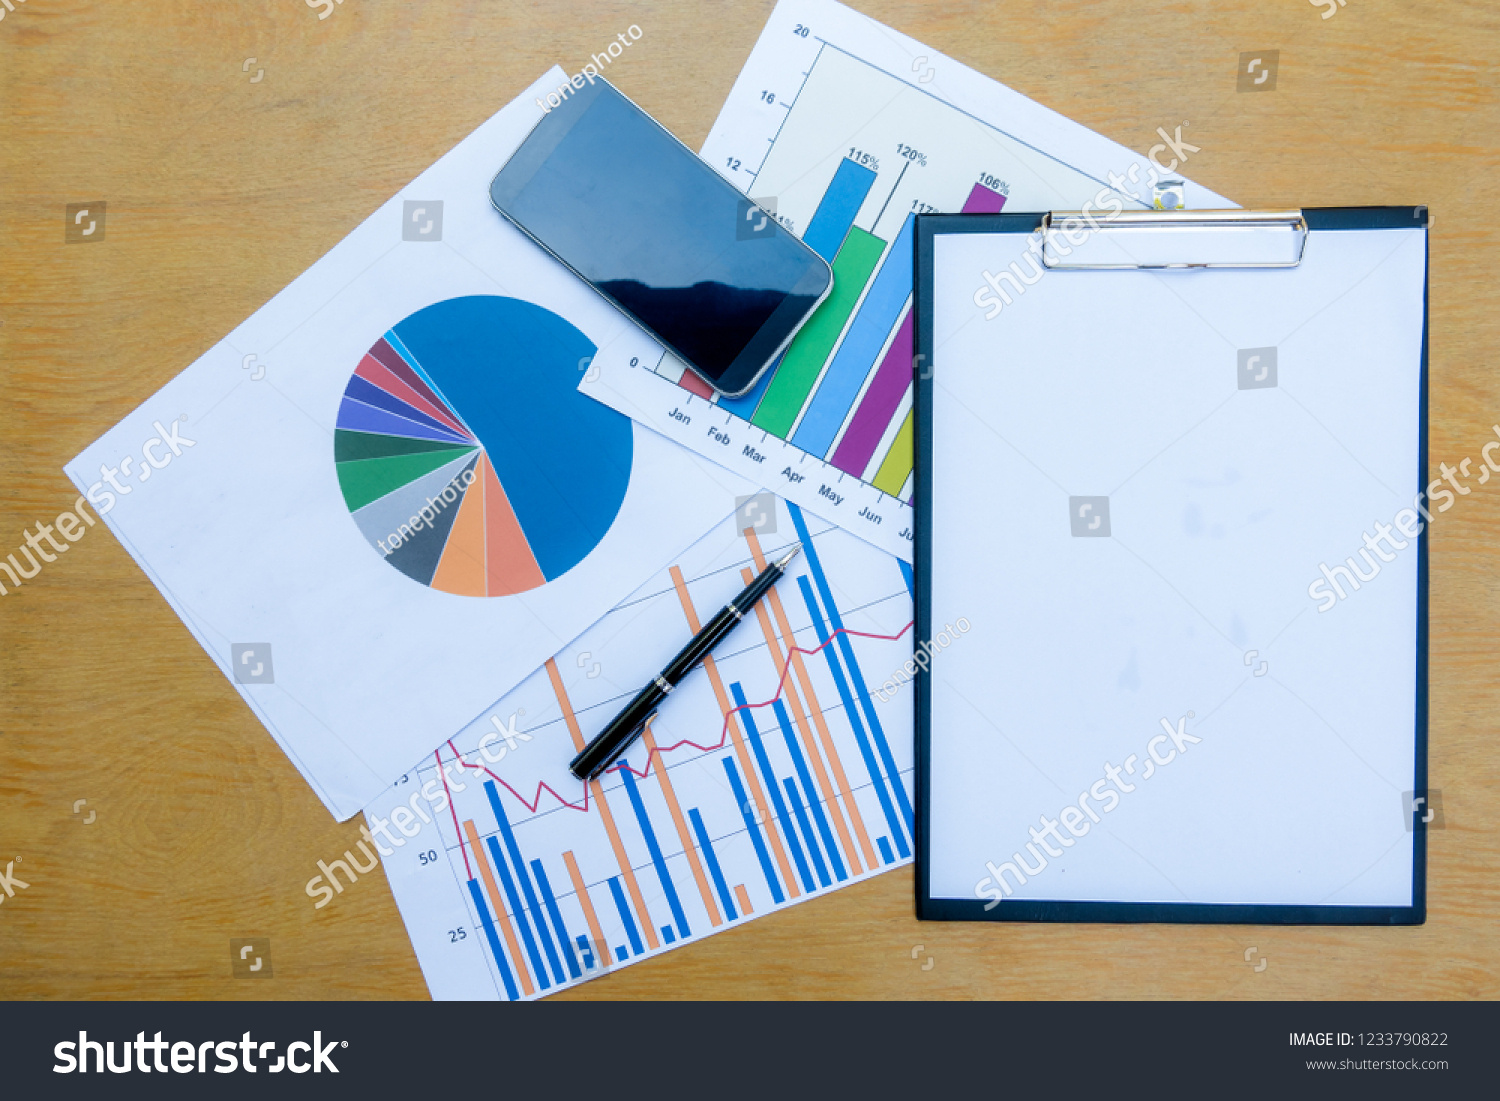 Company analyzes the company's annual financial statements, balances work with graphical documents. Economic picture, project, market, finance and tax office #1233790822